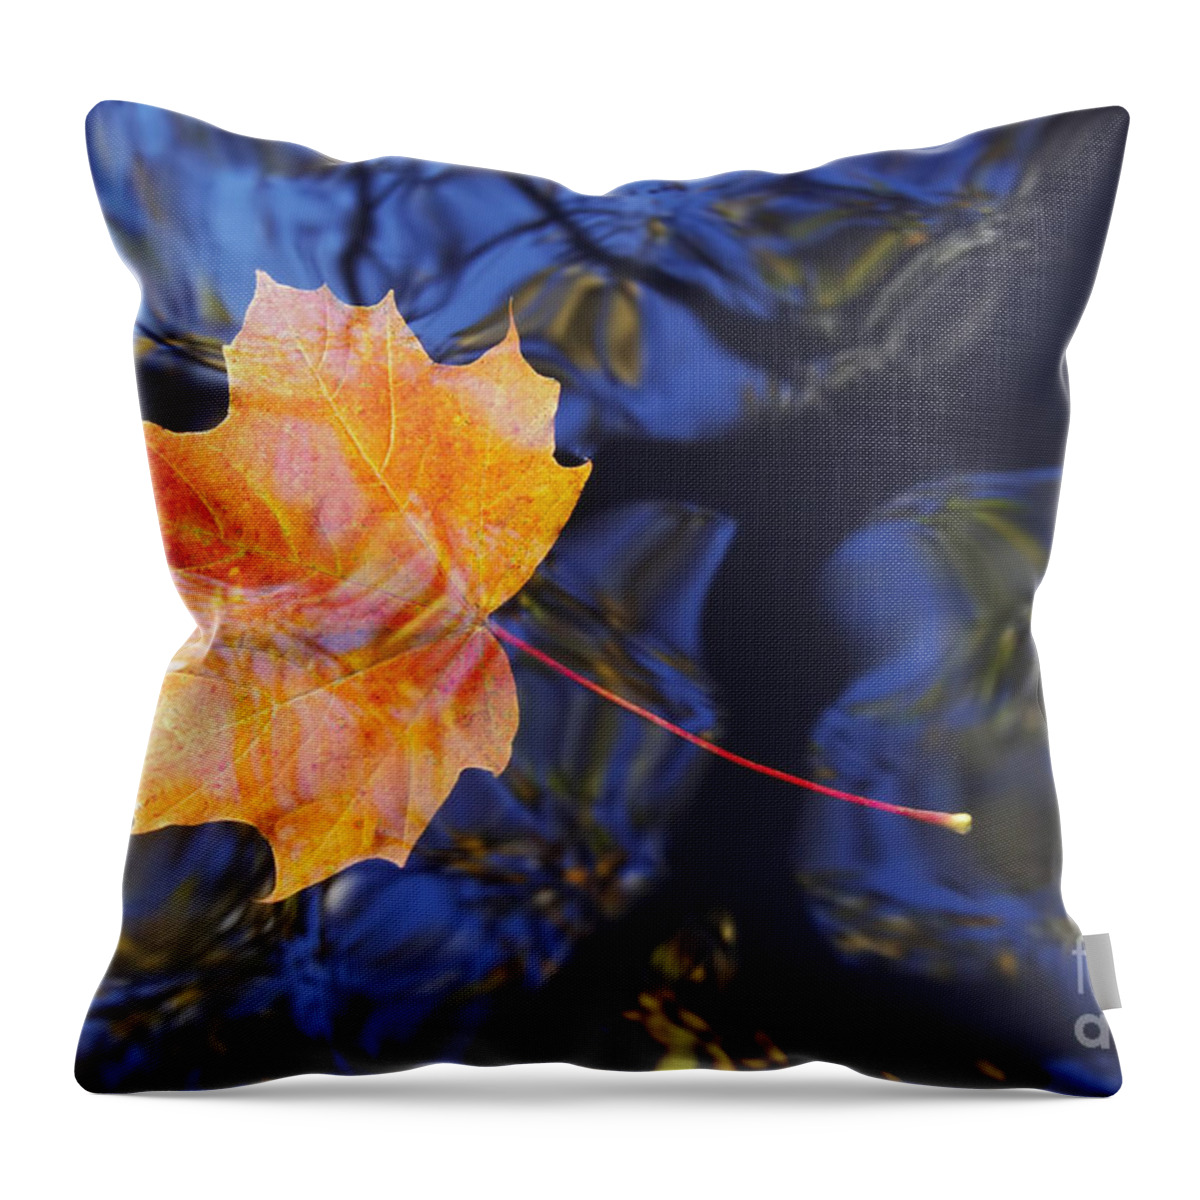 Leaf Throw Pillow featuring the photograph Autumn Leaf On The Water #3 by Michal Boubin